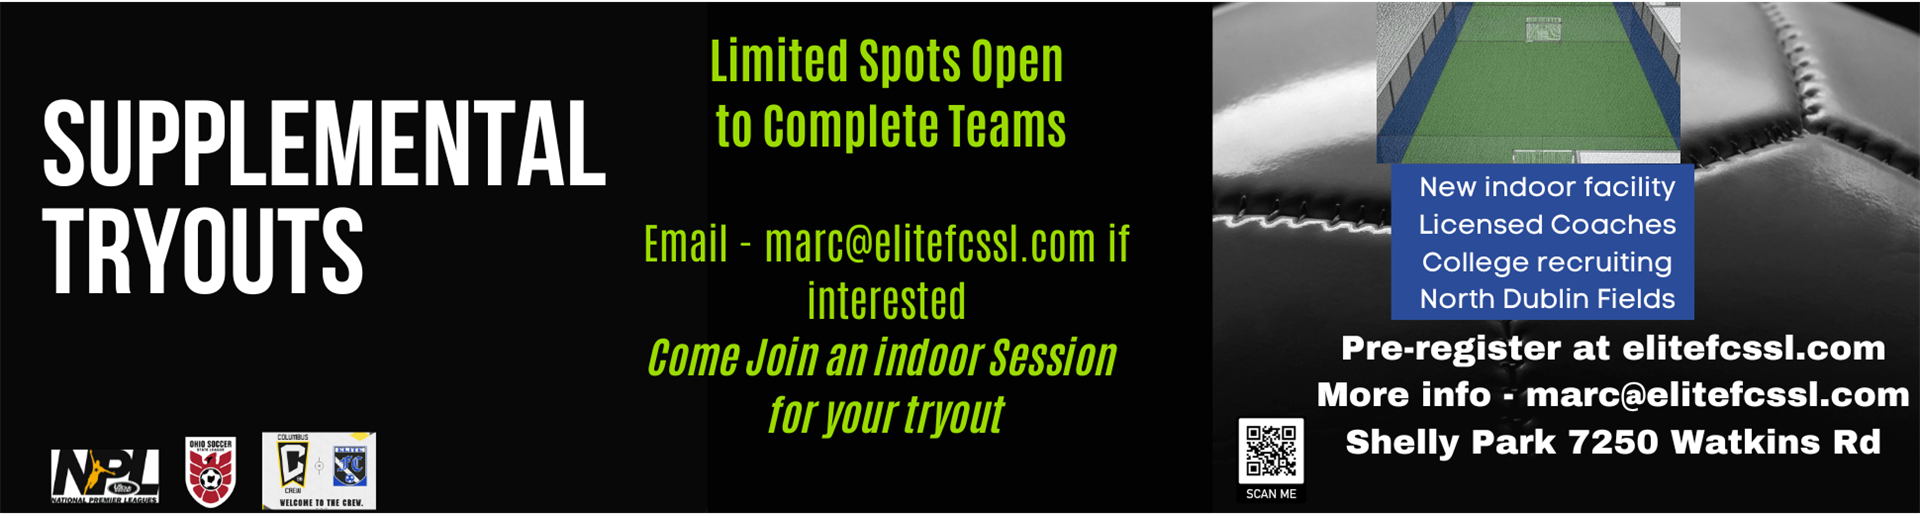 Supplemental Tryout for Spr24 Spots 